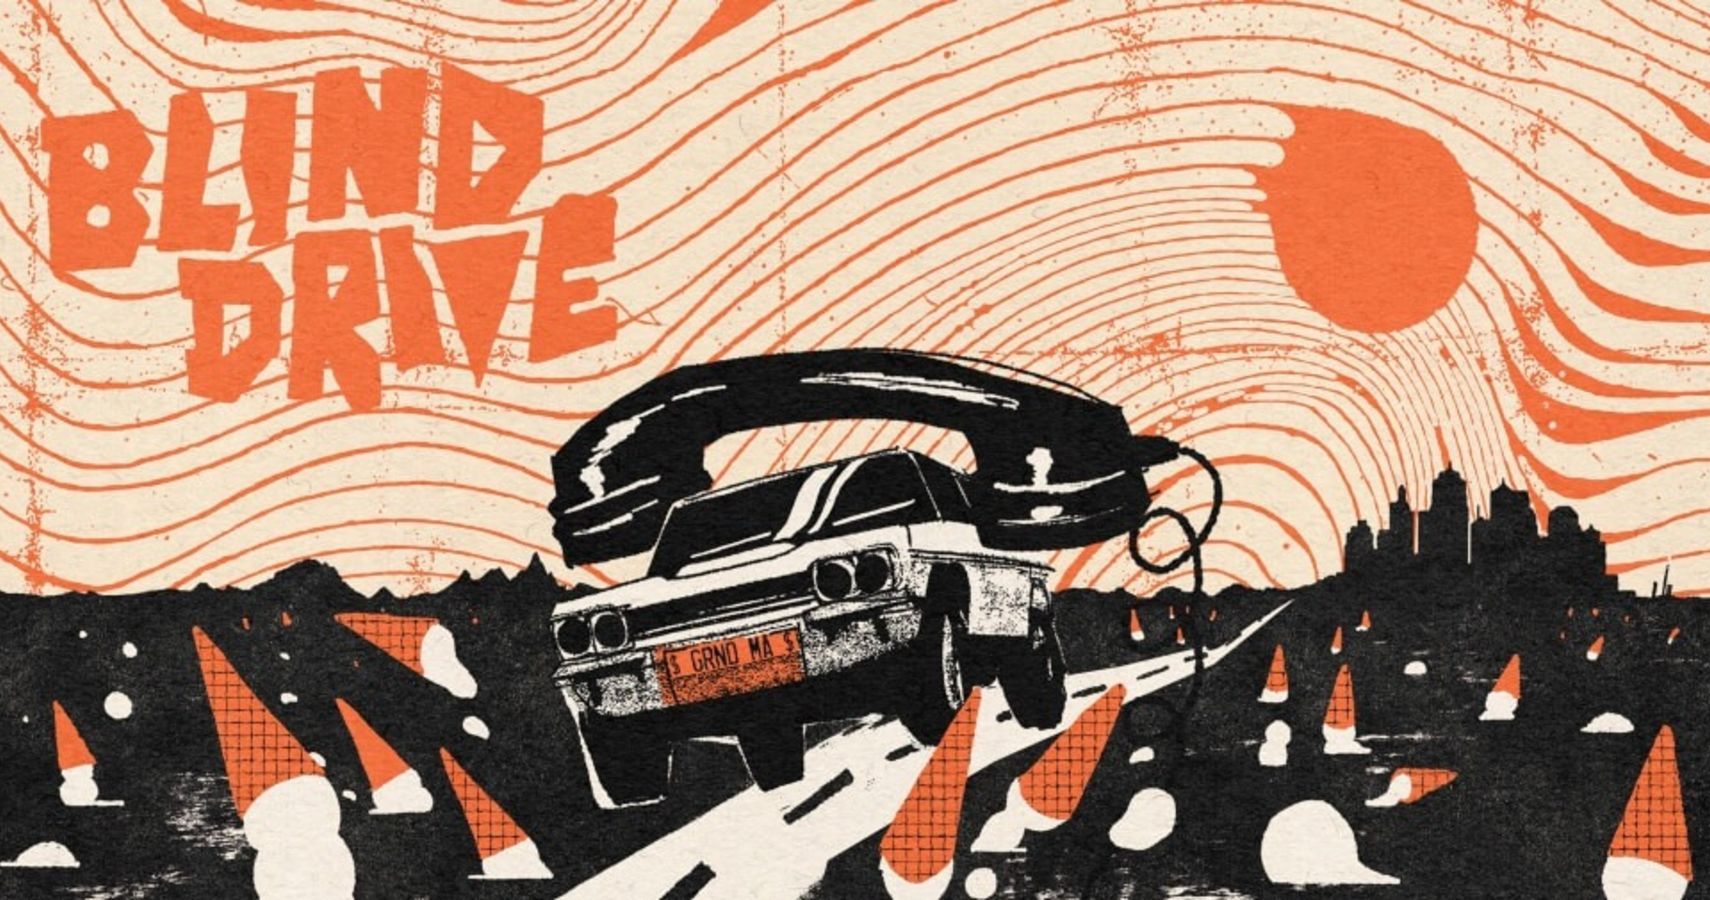 Blind Drive Is An Upcoming ComedyThriller That Can Be Played With Your Eyes Closed